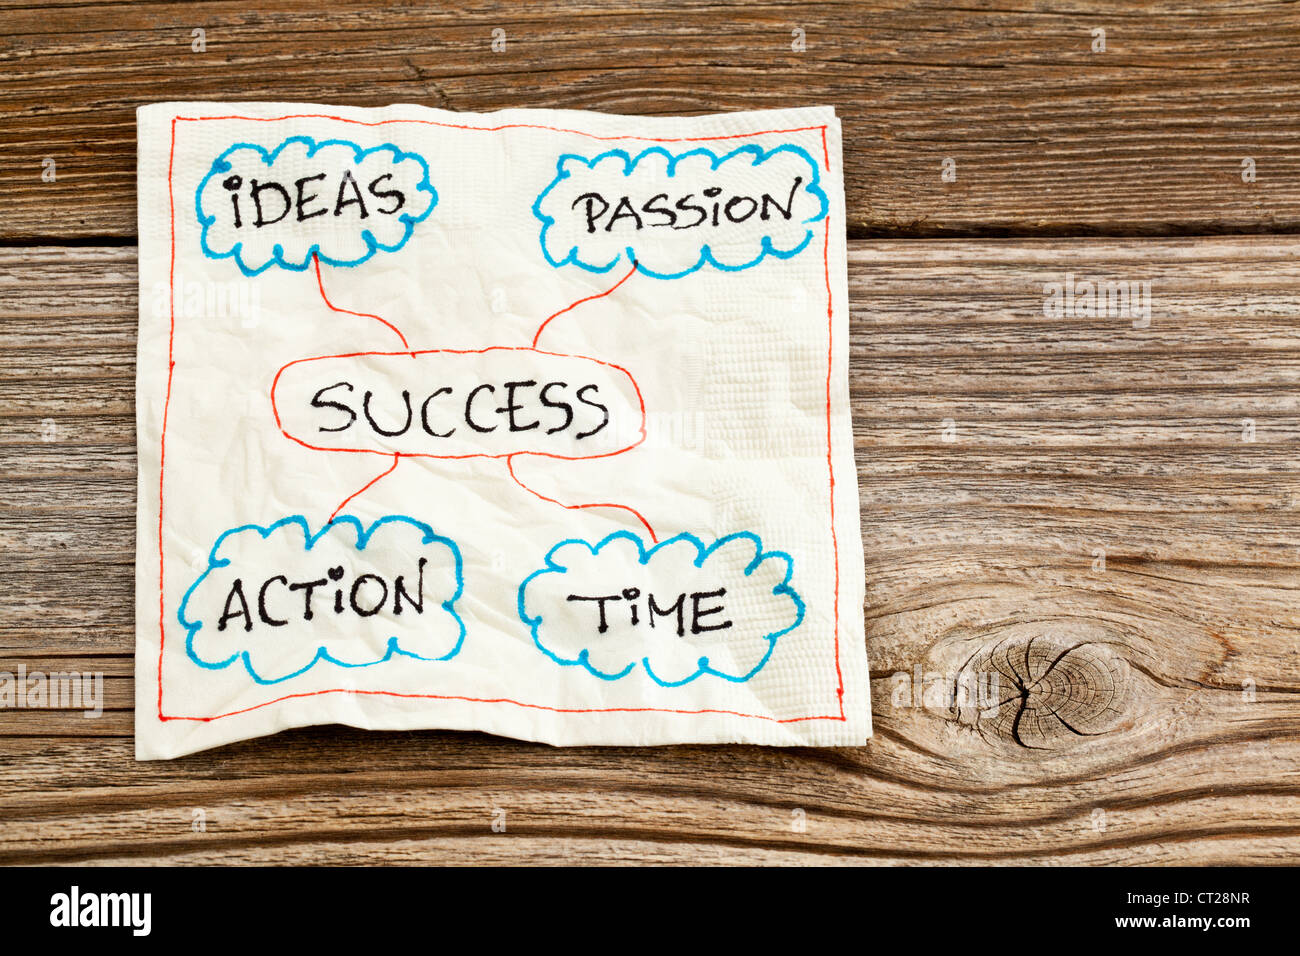 success ingredients - ideas, passion, time and action - a napkin on grained wood Stock Photo